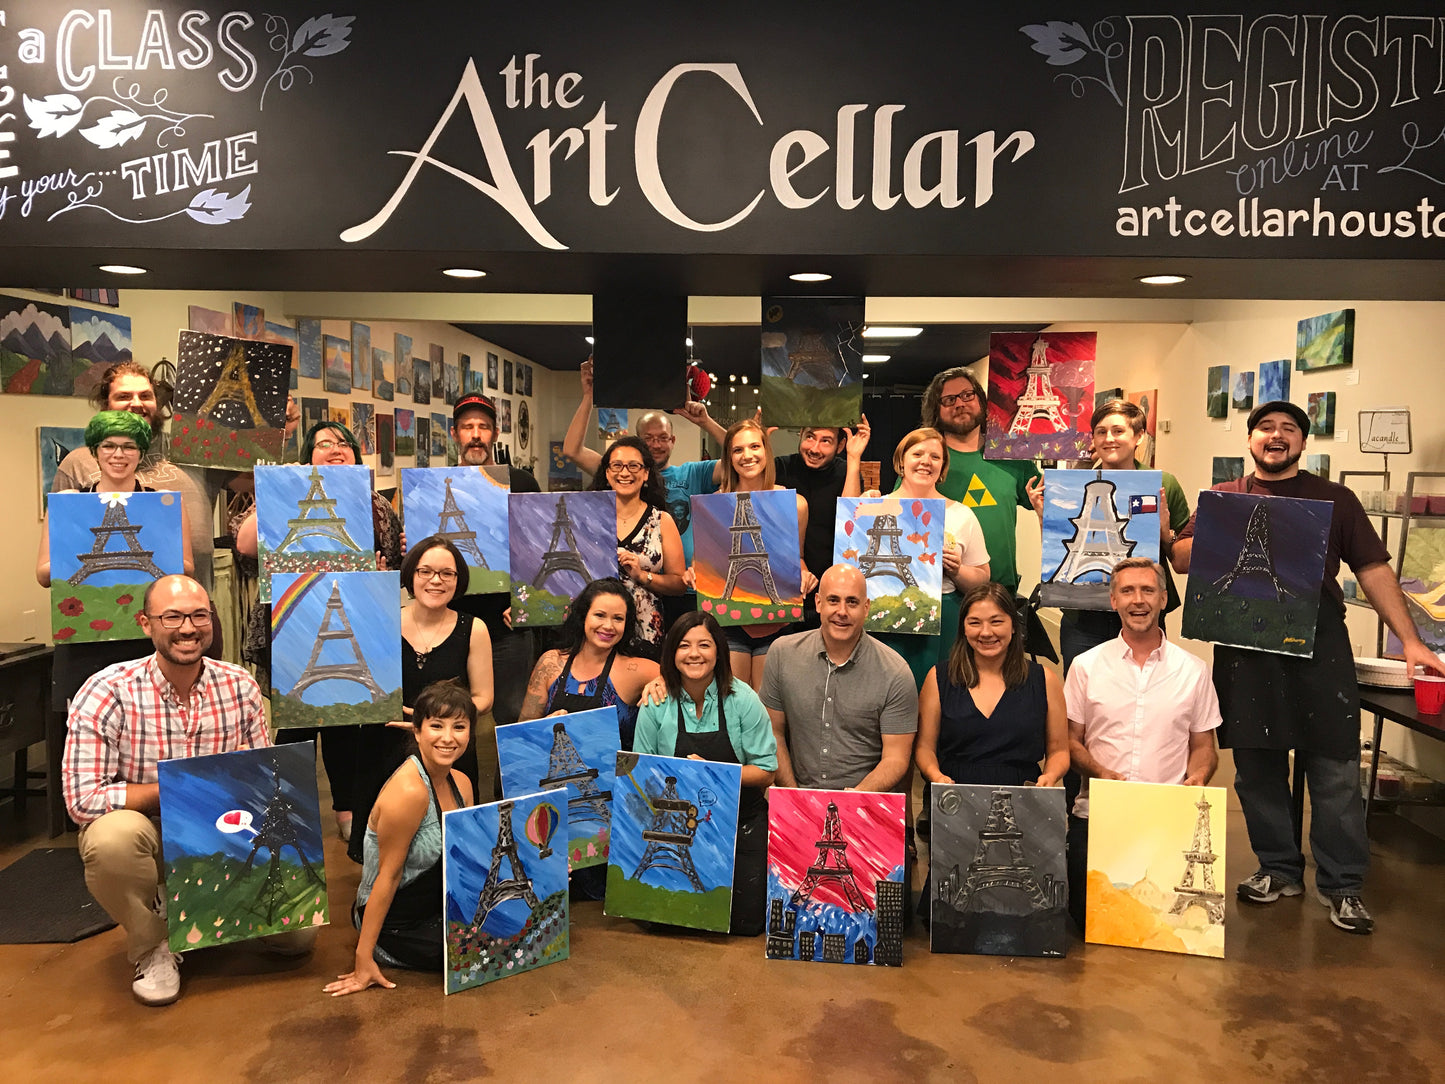 Wed, Mar 31, 4-6P “A Peaceful Day” Houston Painting Class